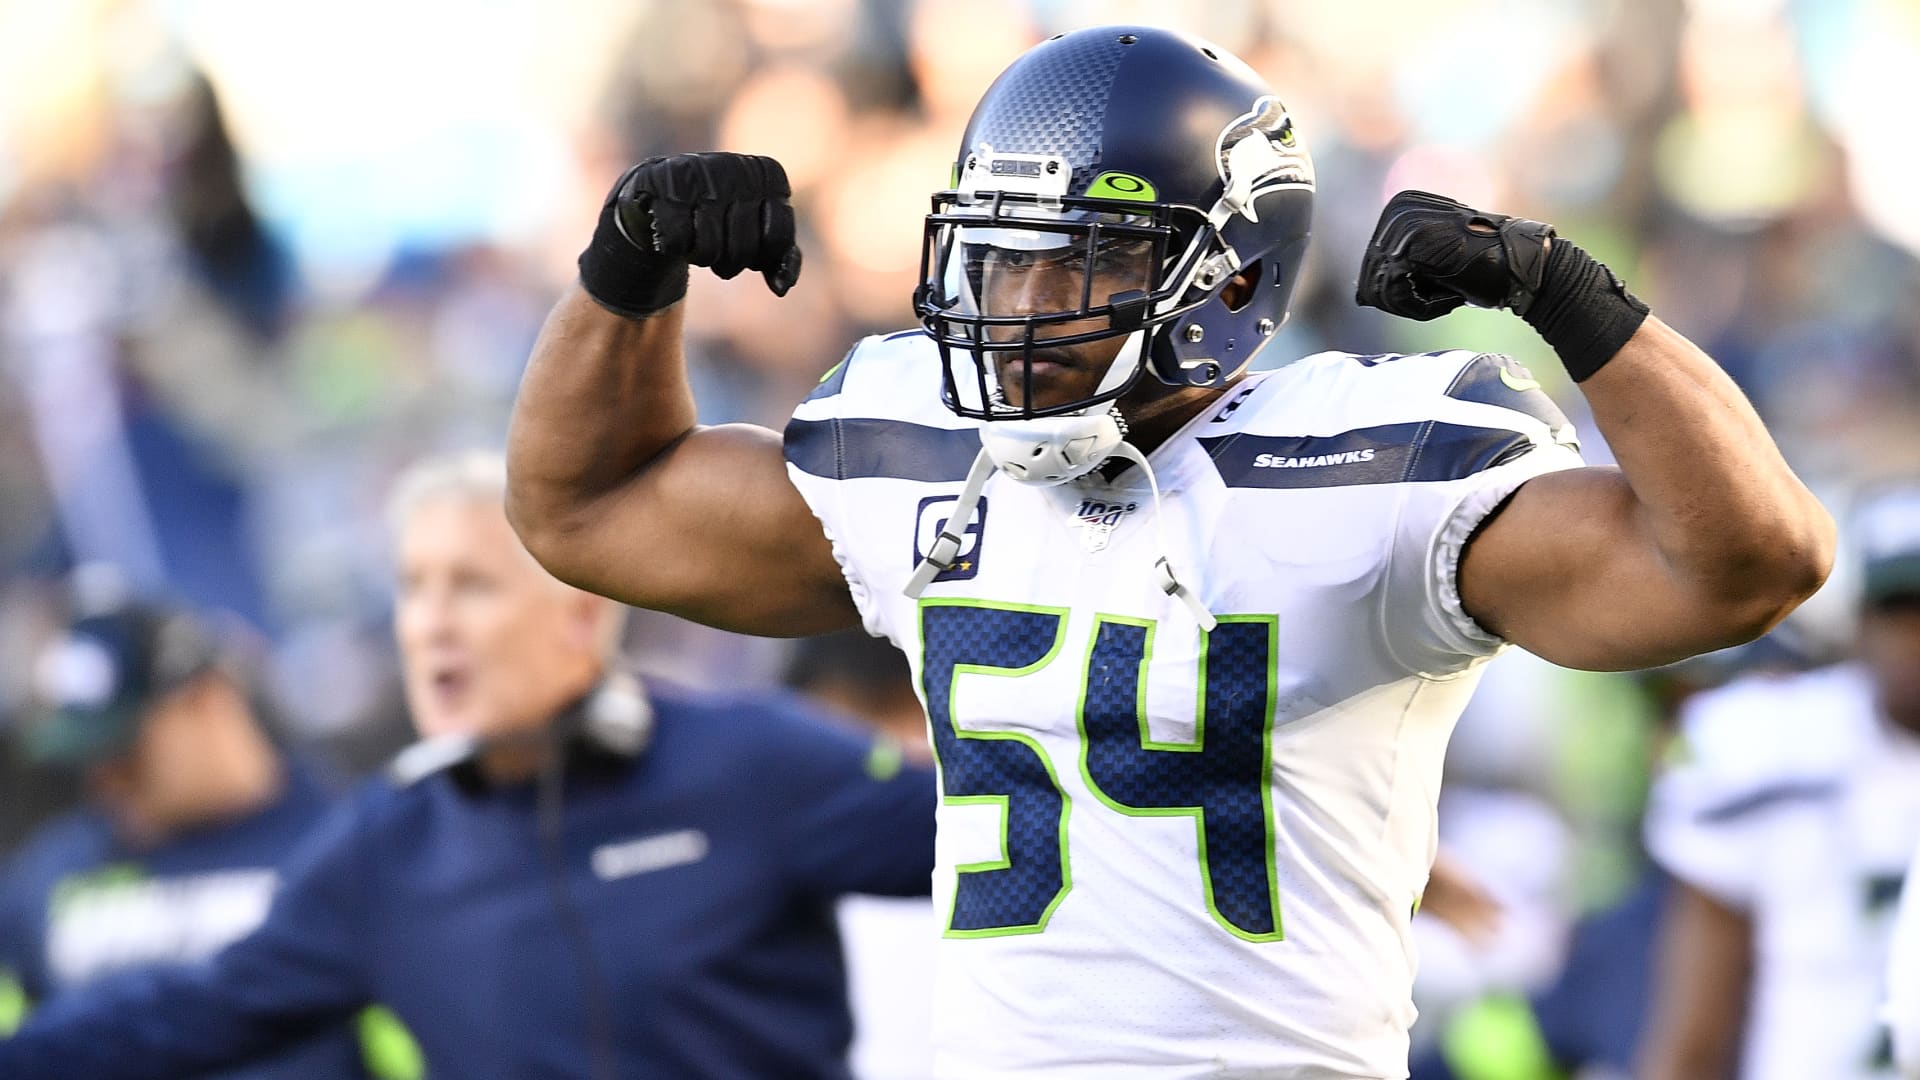 Bobby Wagner #54 of the Seattle Seahawks reacts after a touchdown against the Carolina Panthers during the fourth quarter of their game at Bank of America Stadium on December 15, 2019 in Charlotte, North Carolina.